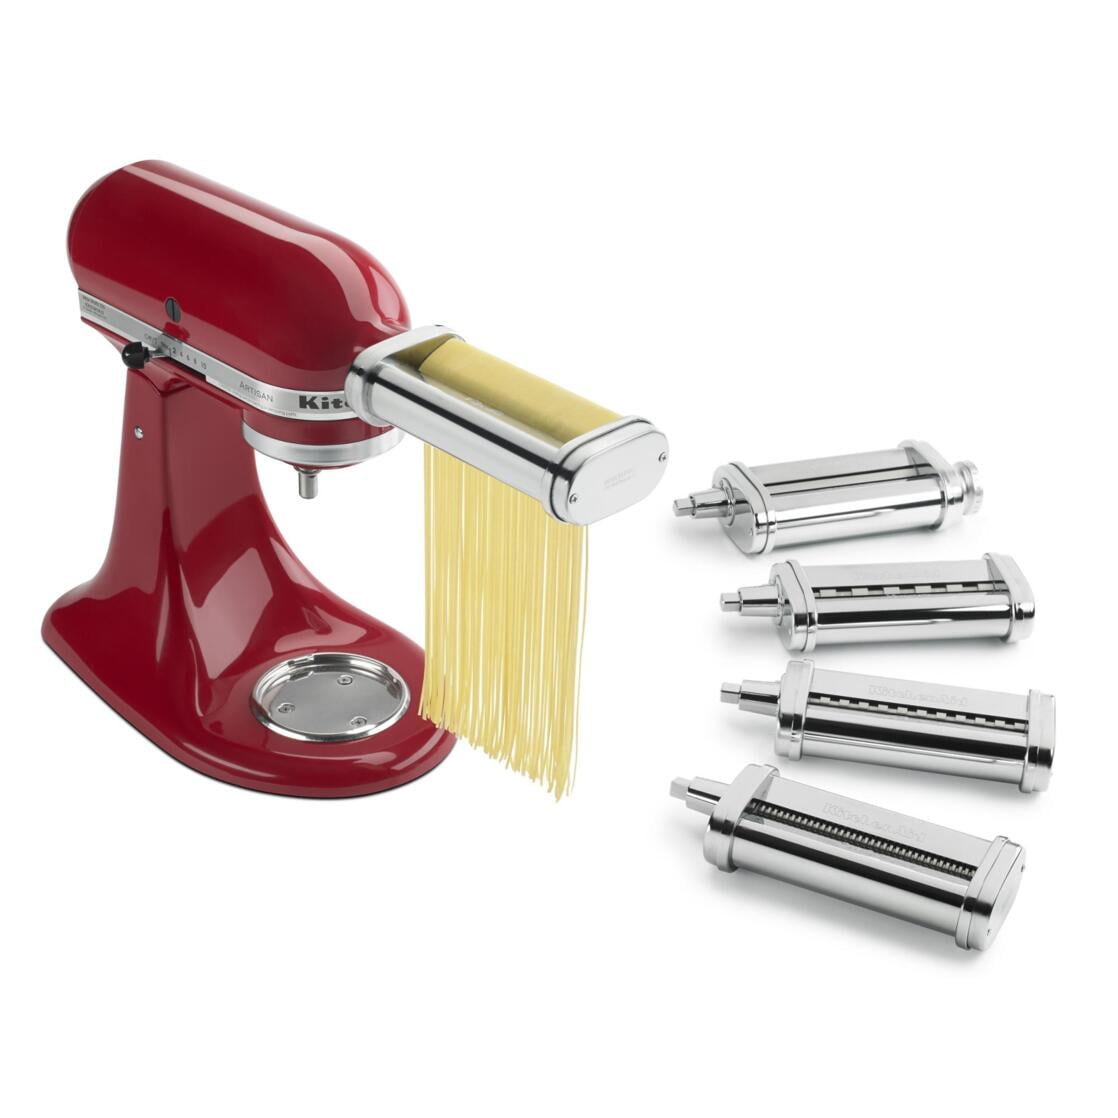 NEW Kitchenaid Part KPRA Pasta Roller and cutter for Spaghetti and Fettuccine 